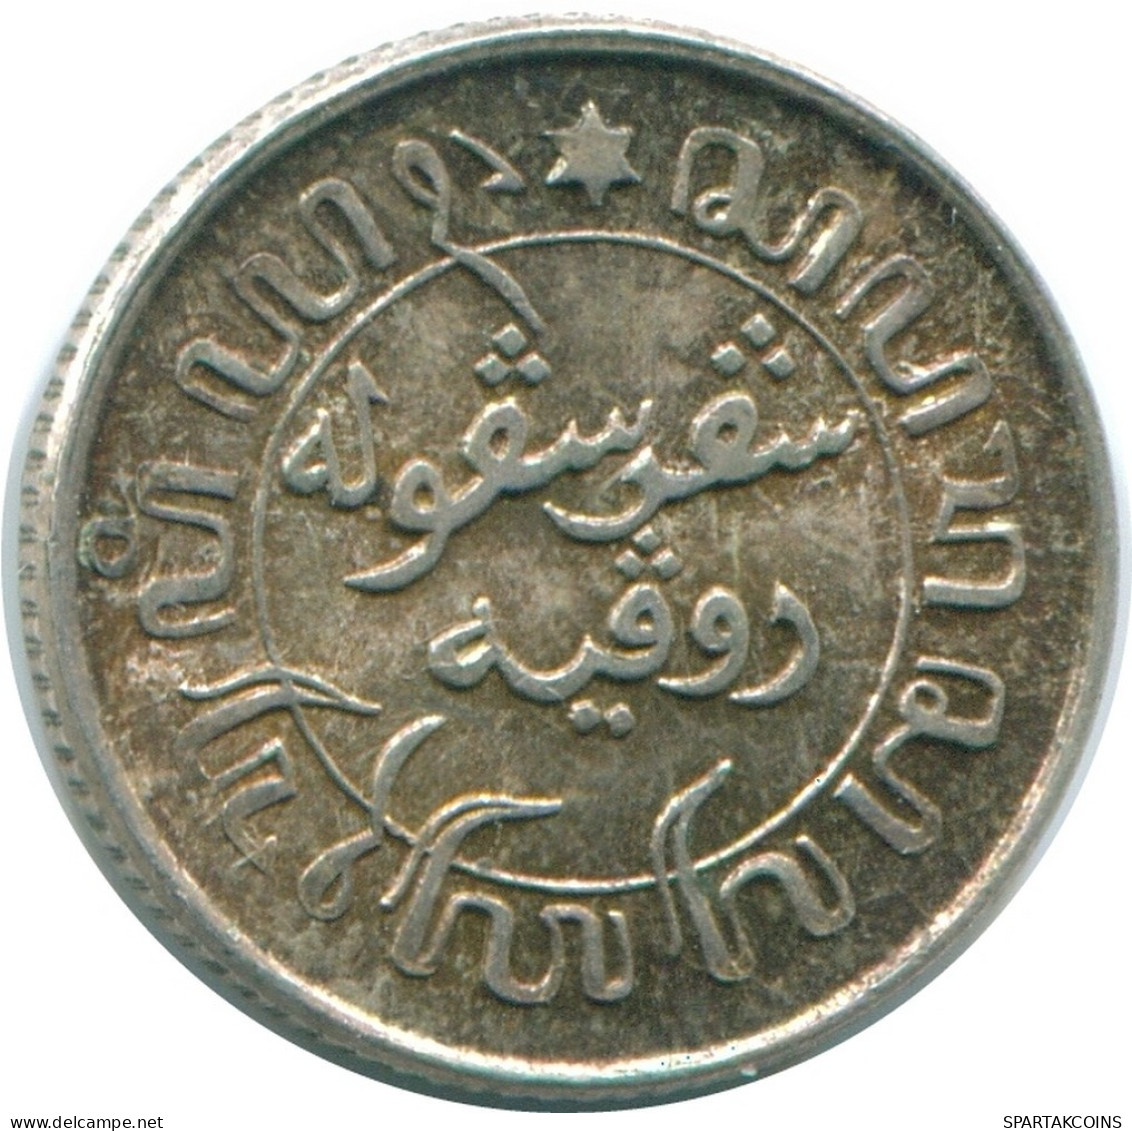 1/10 GULDEN 1945 P NETHERLANDS EAST INDIES SILVER Colonial Coin #NL14156.3.U.A - Dutch East Indies